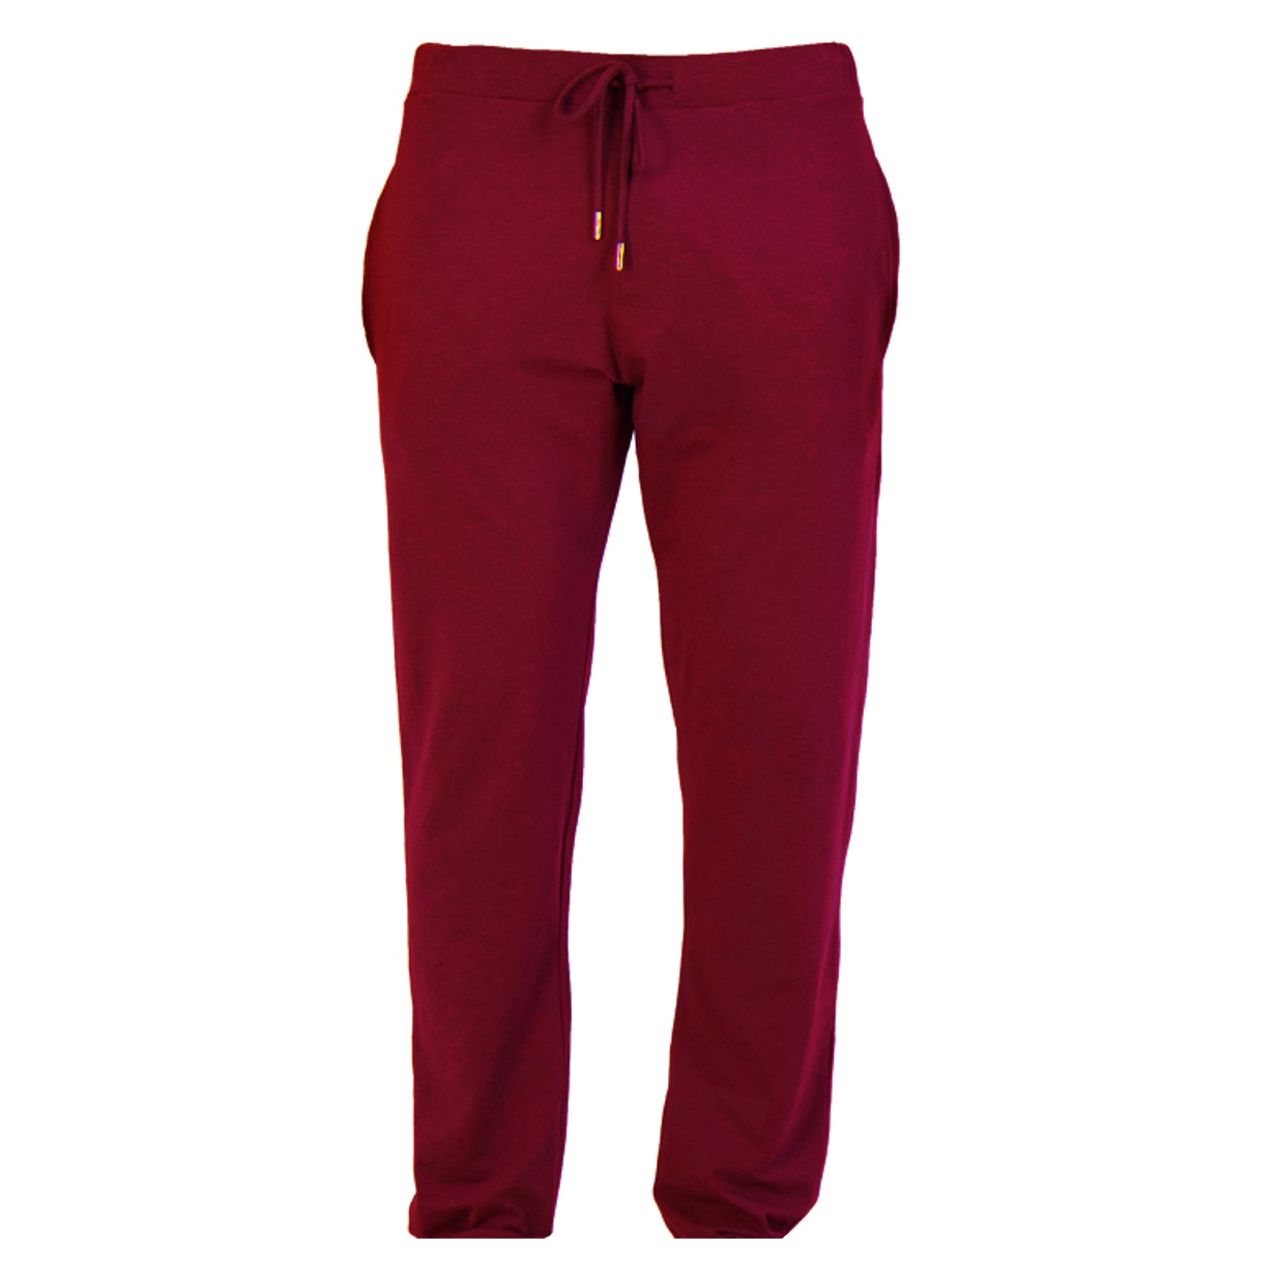 Tailored Lounge Pant in Burgundy by Wood Underwear